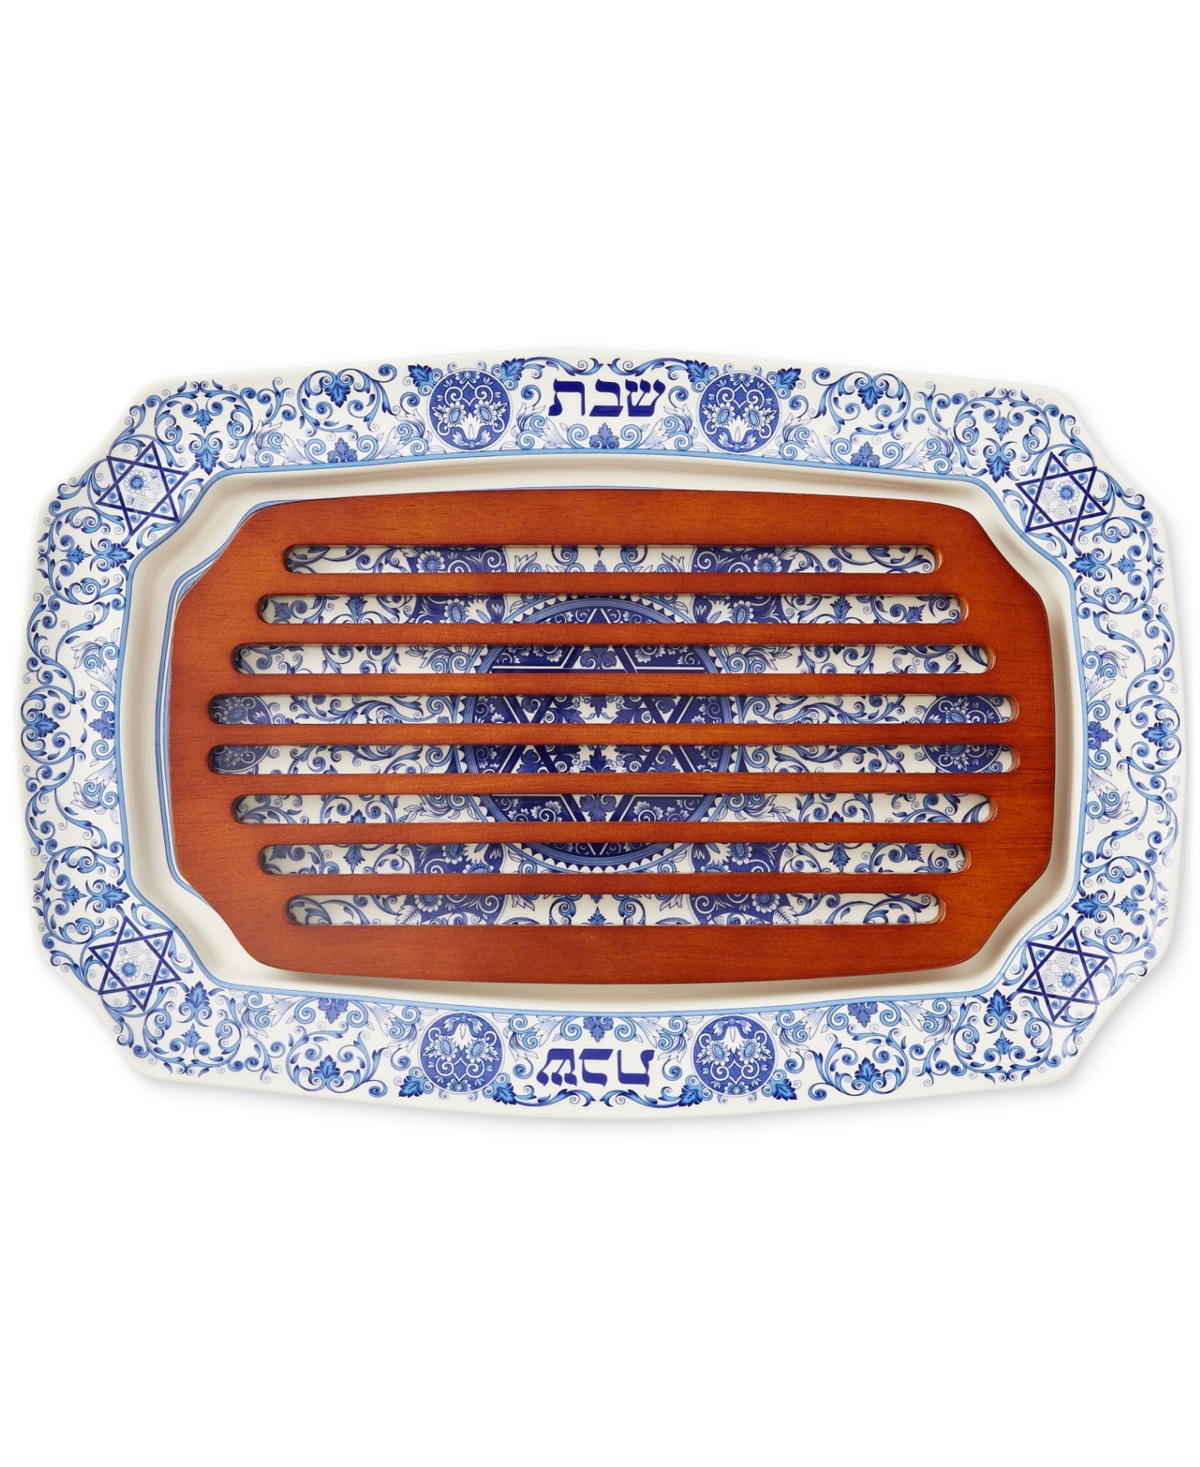 Judaica Challah Tray with Wooden Insert - blue